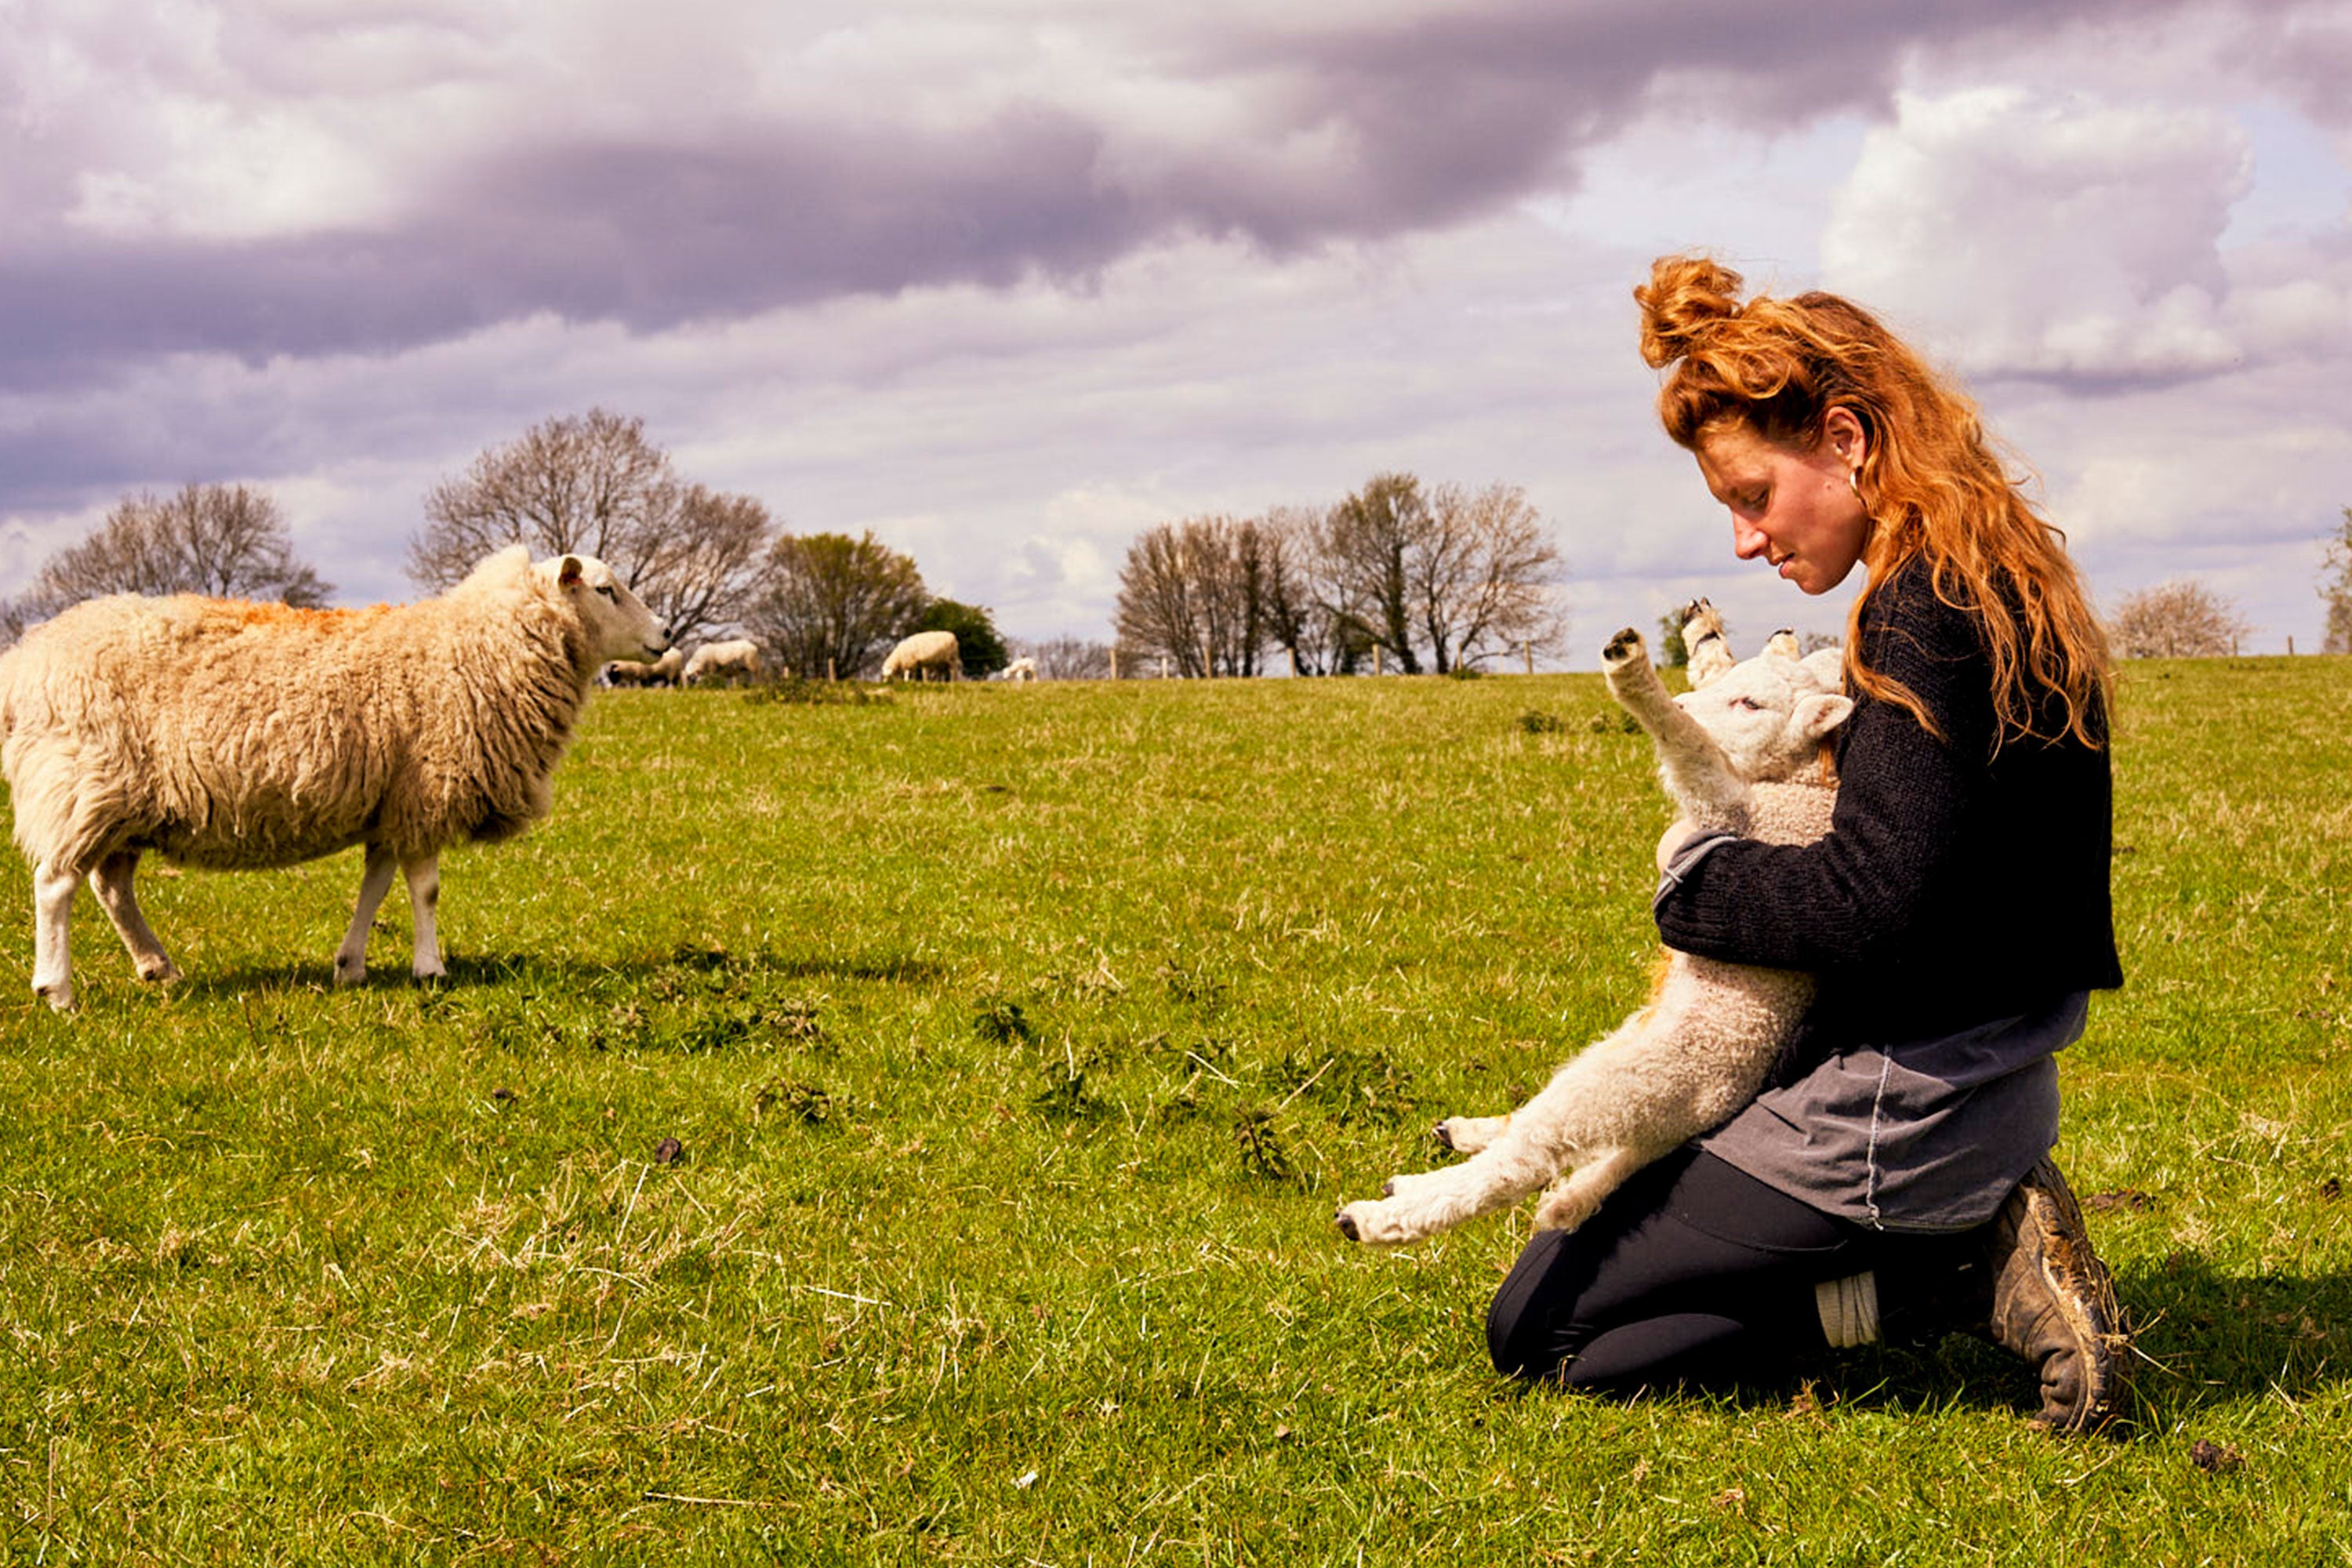 Zoe Colville holding a lamb up against her.